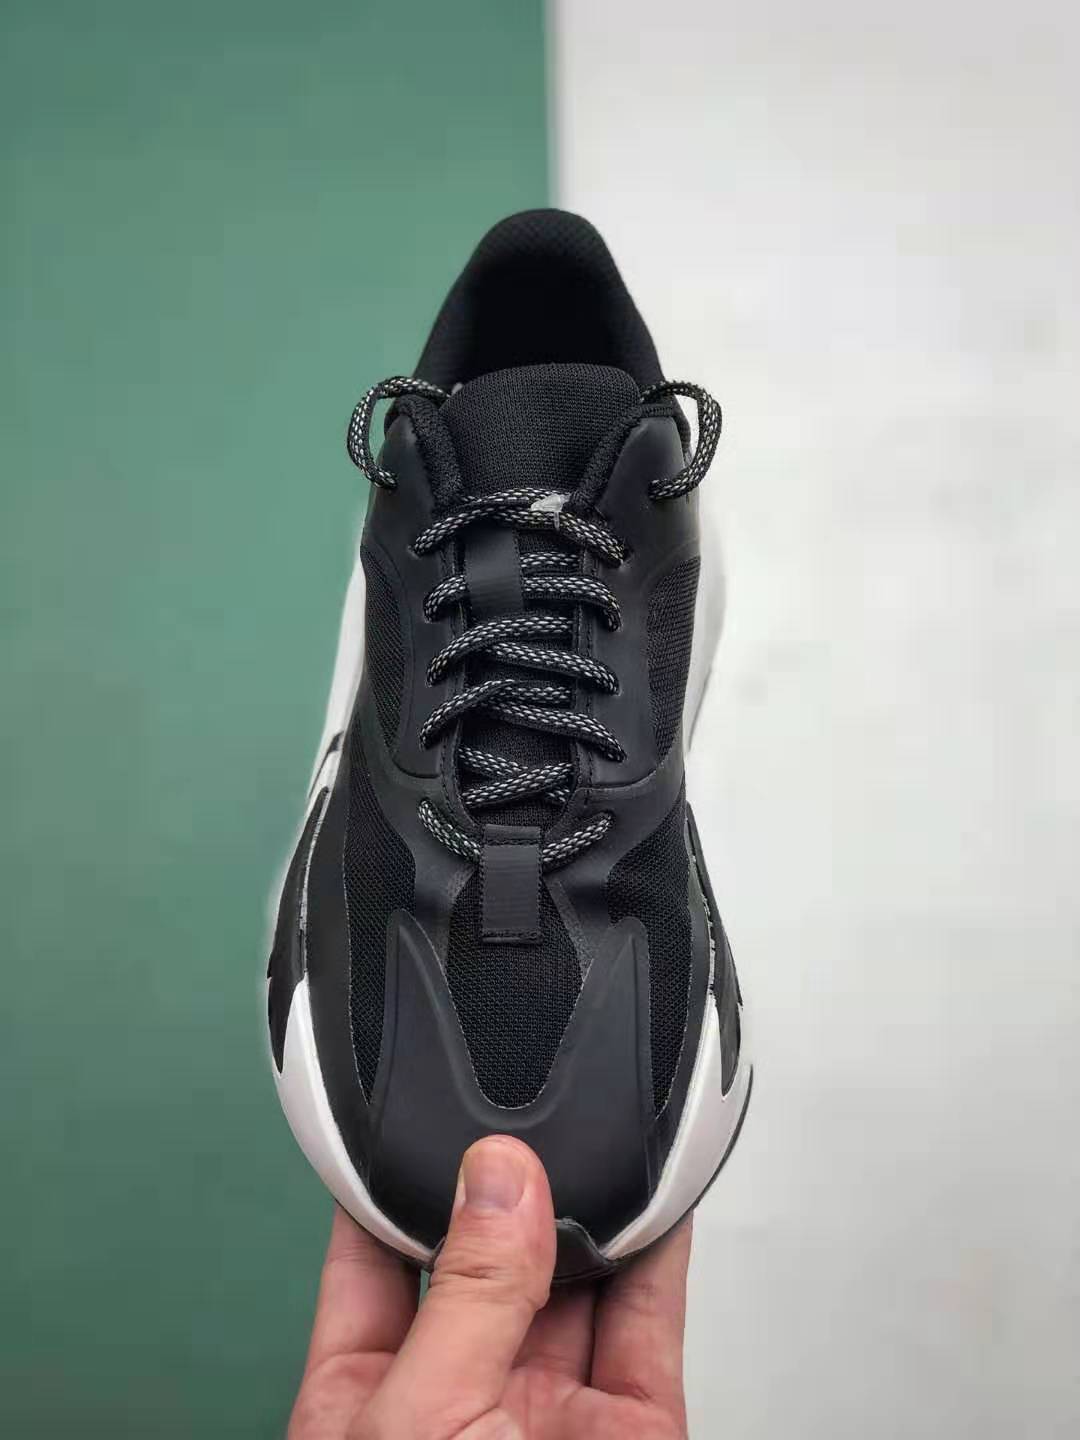 Adidas Yeezy Boost 700 Black White EG6991 - Premium Footwear at Competitive Prices